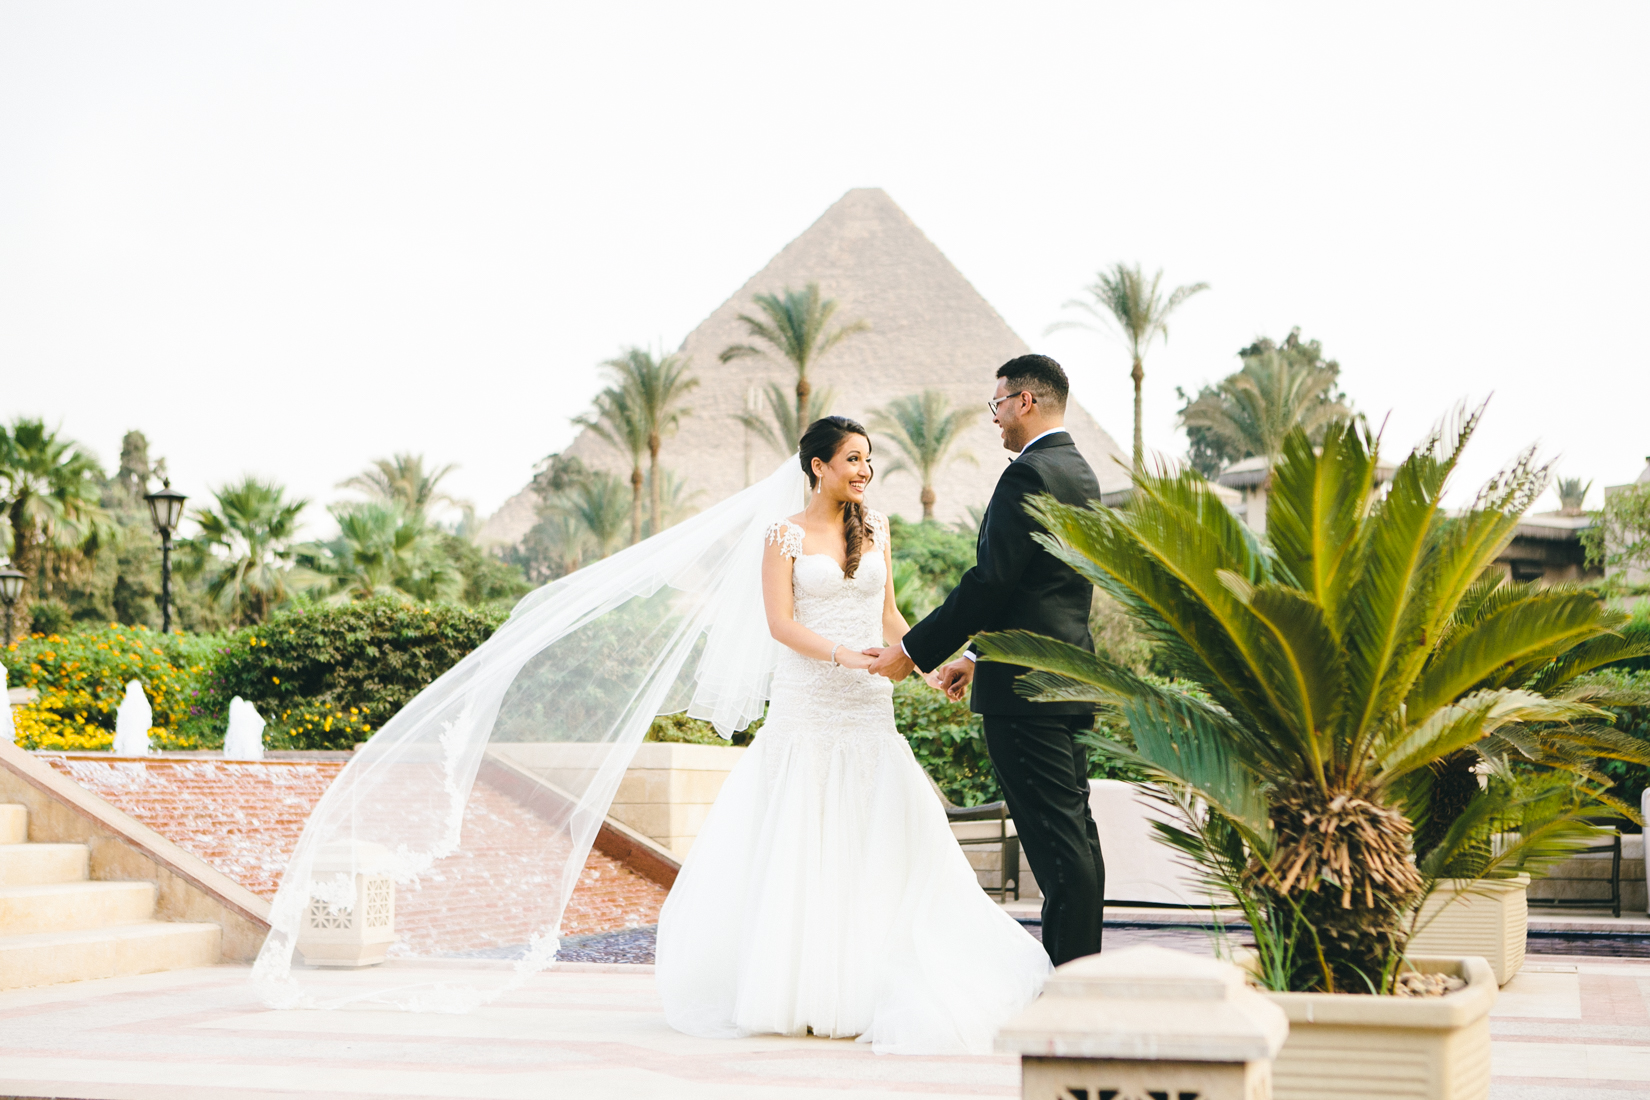 Who pays for the wedding in egyptian culture?